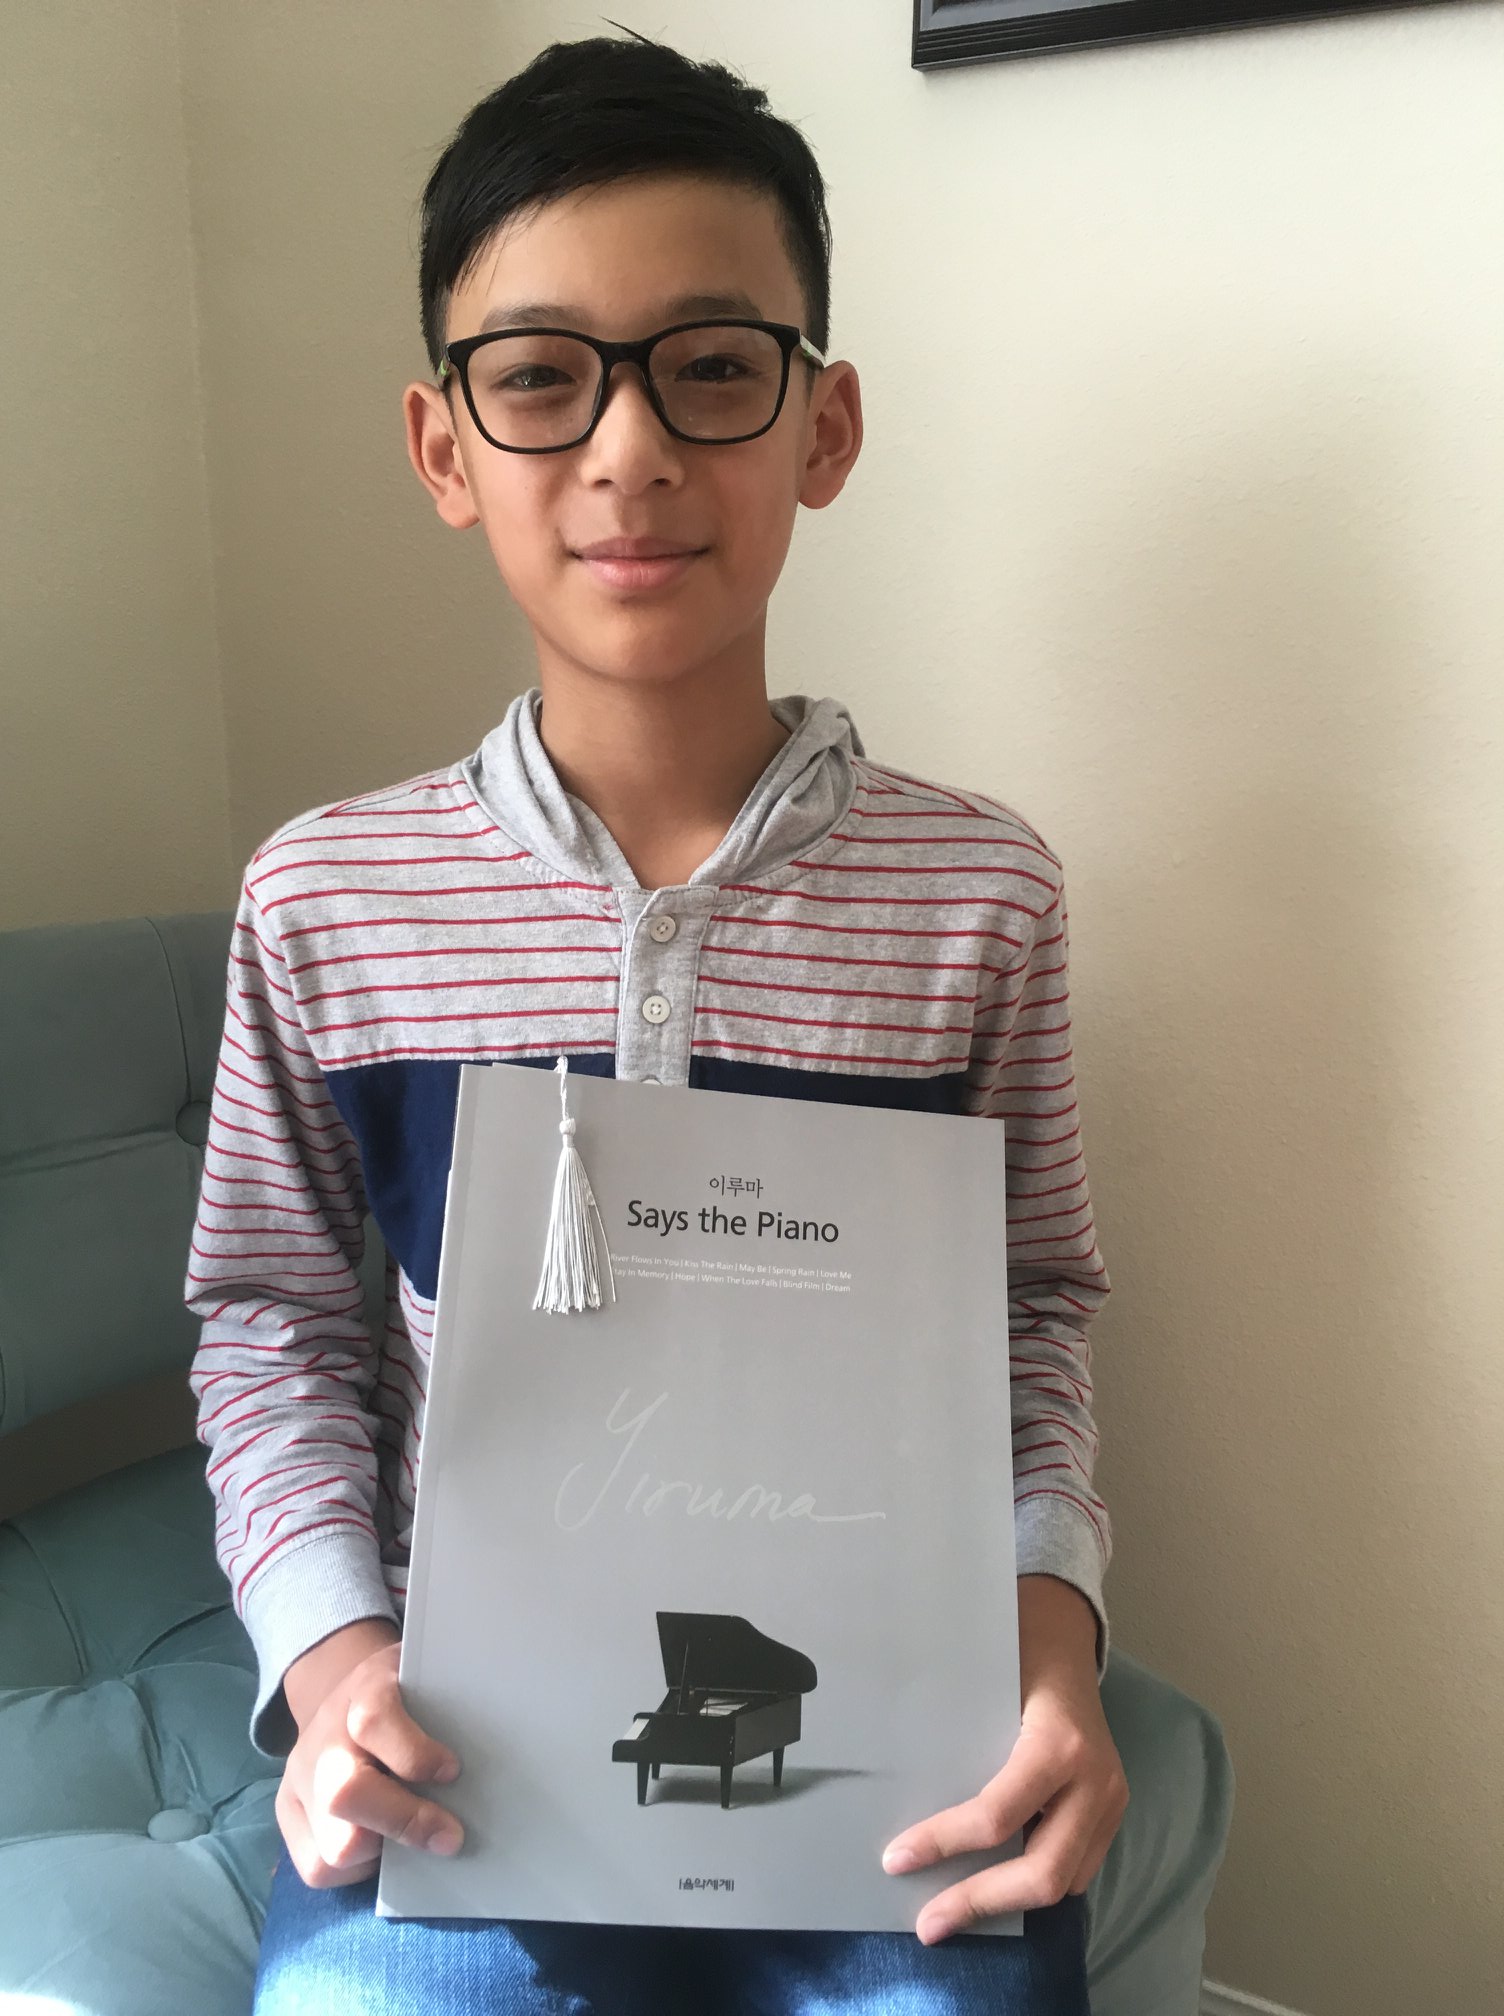 Teenage boy holds a book of Yiruma’s compositions.